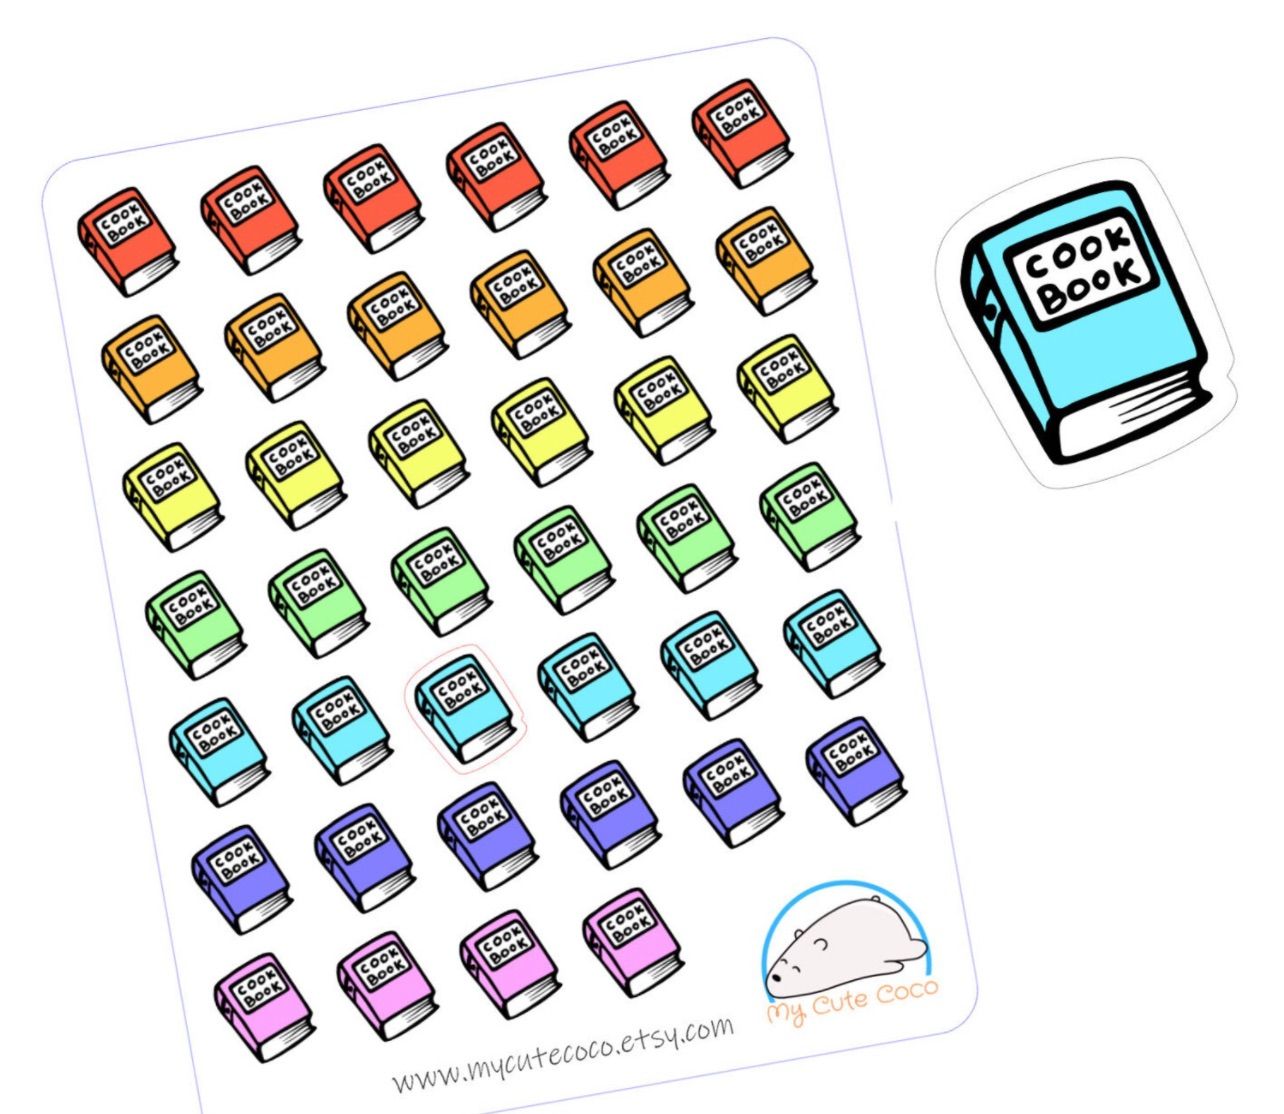 Rainbow colored sticker sheet. Each sticker is a tiny cookbook which reads 